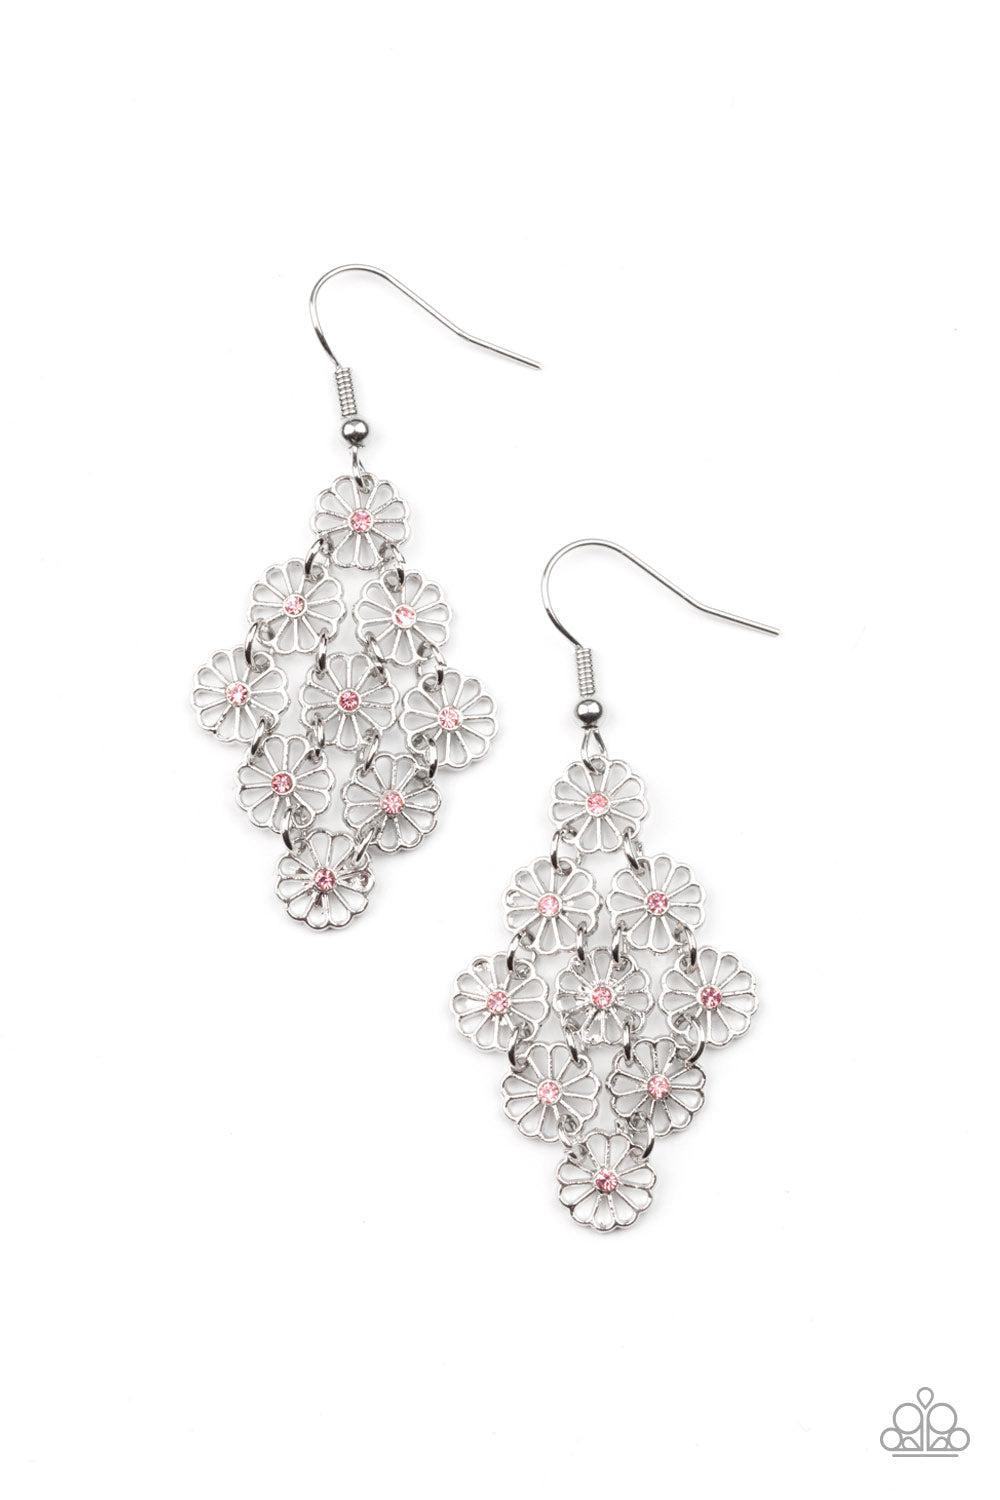 Bustling Blooms Pink Flower Earrings - Paparazzi Accessories- lightbox - CarasShop.com - $5 Jewelry by Cara Jewels